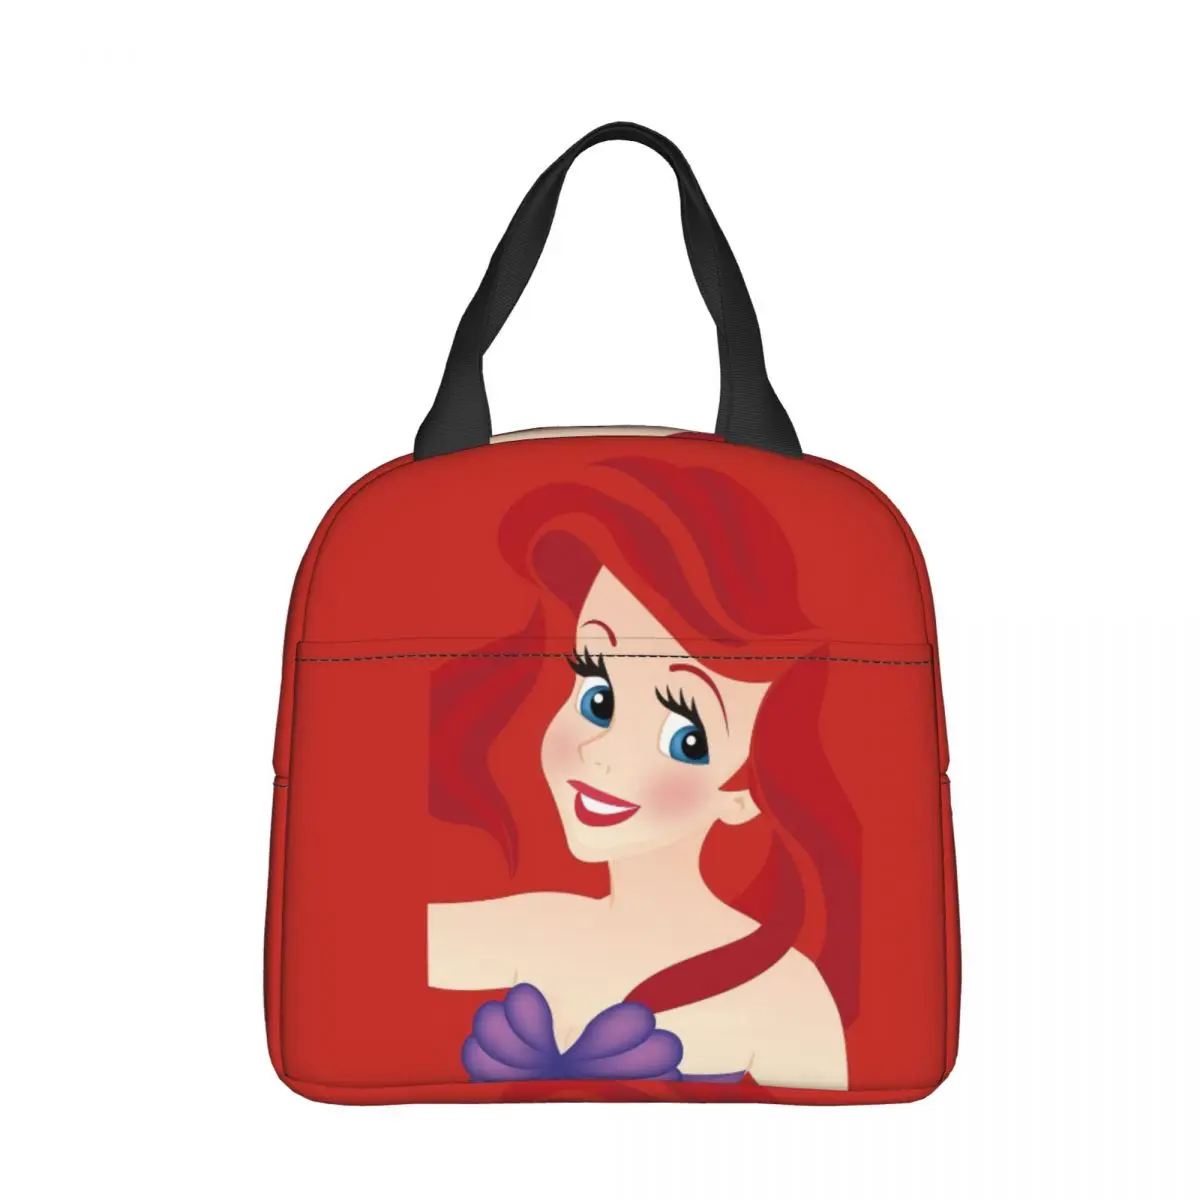 

Disney The Little Mermaid Ariel Princess Insulated Lunch Bag Cooler Bag Reusable Leakproof Tote Lunch Box Bento Pouch